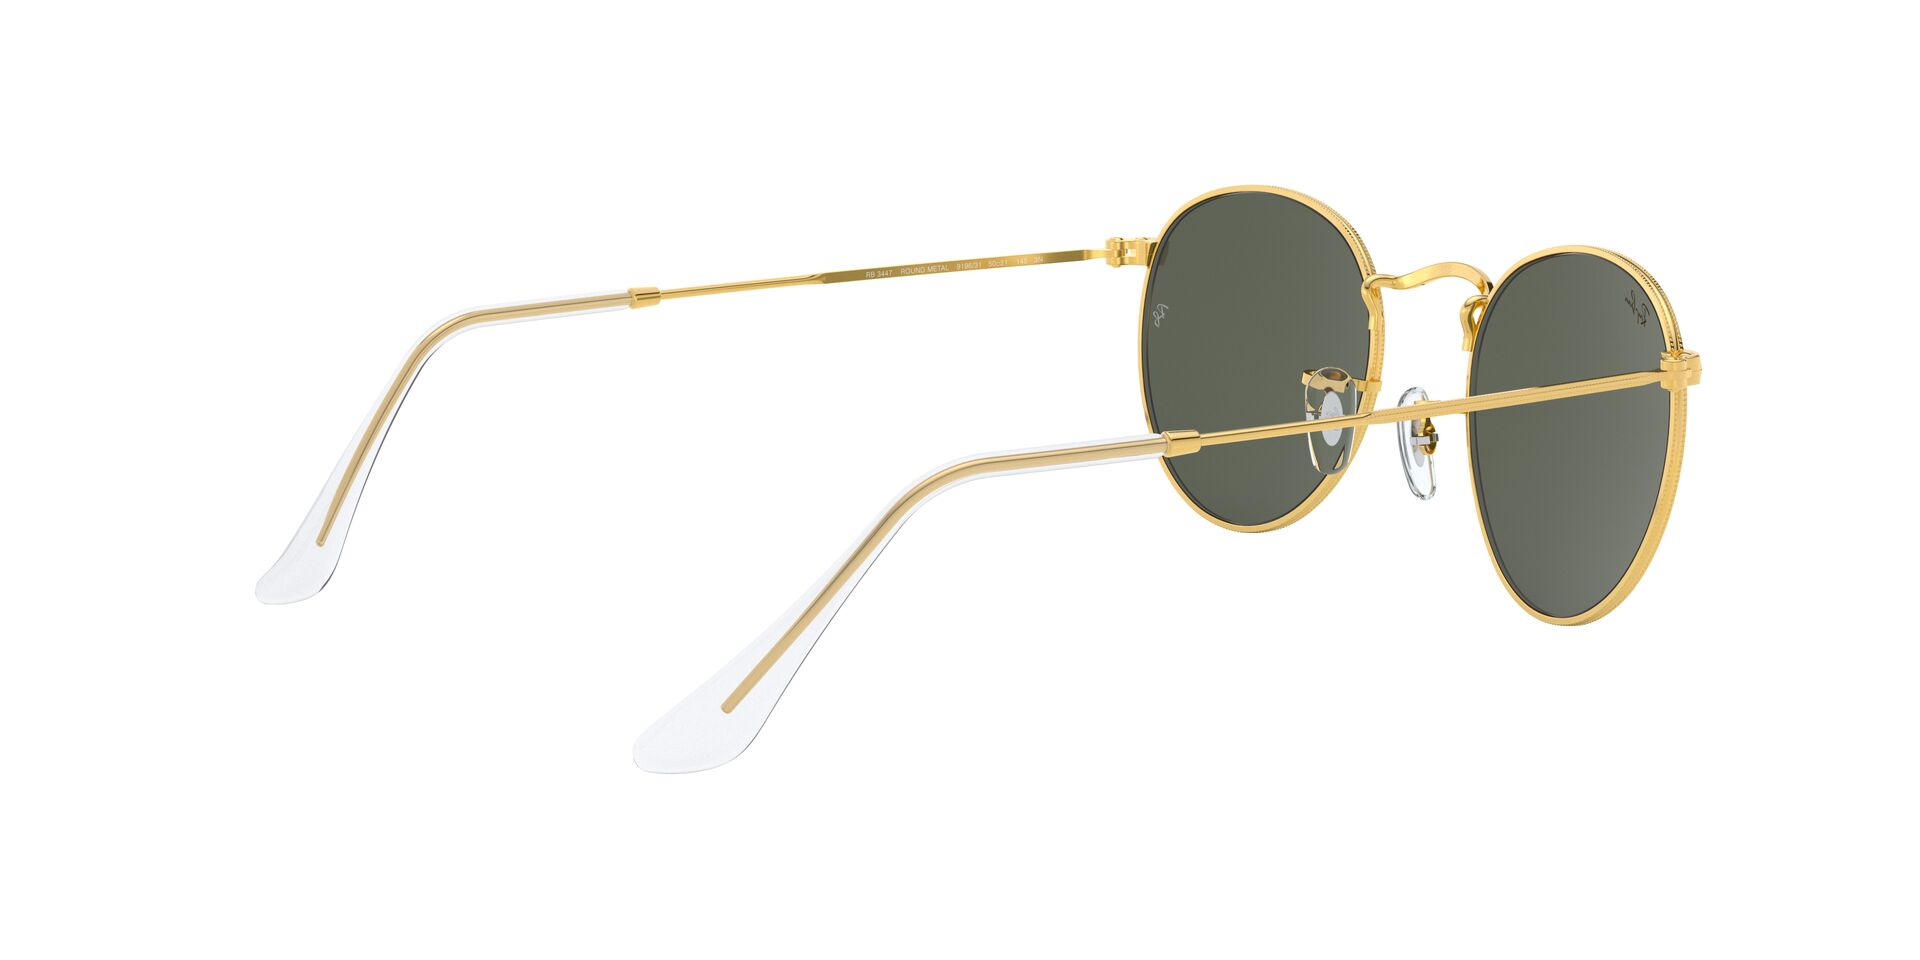 Lente solar Ray-Ban Round Metal Legend Gold RB3447 Verde Classic